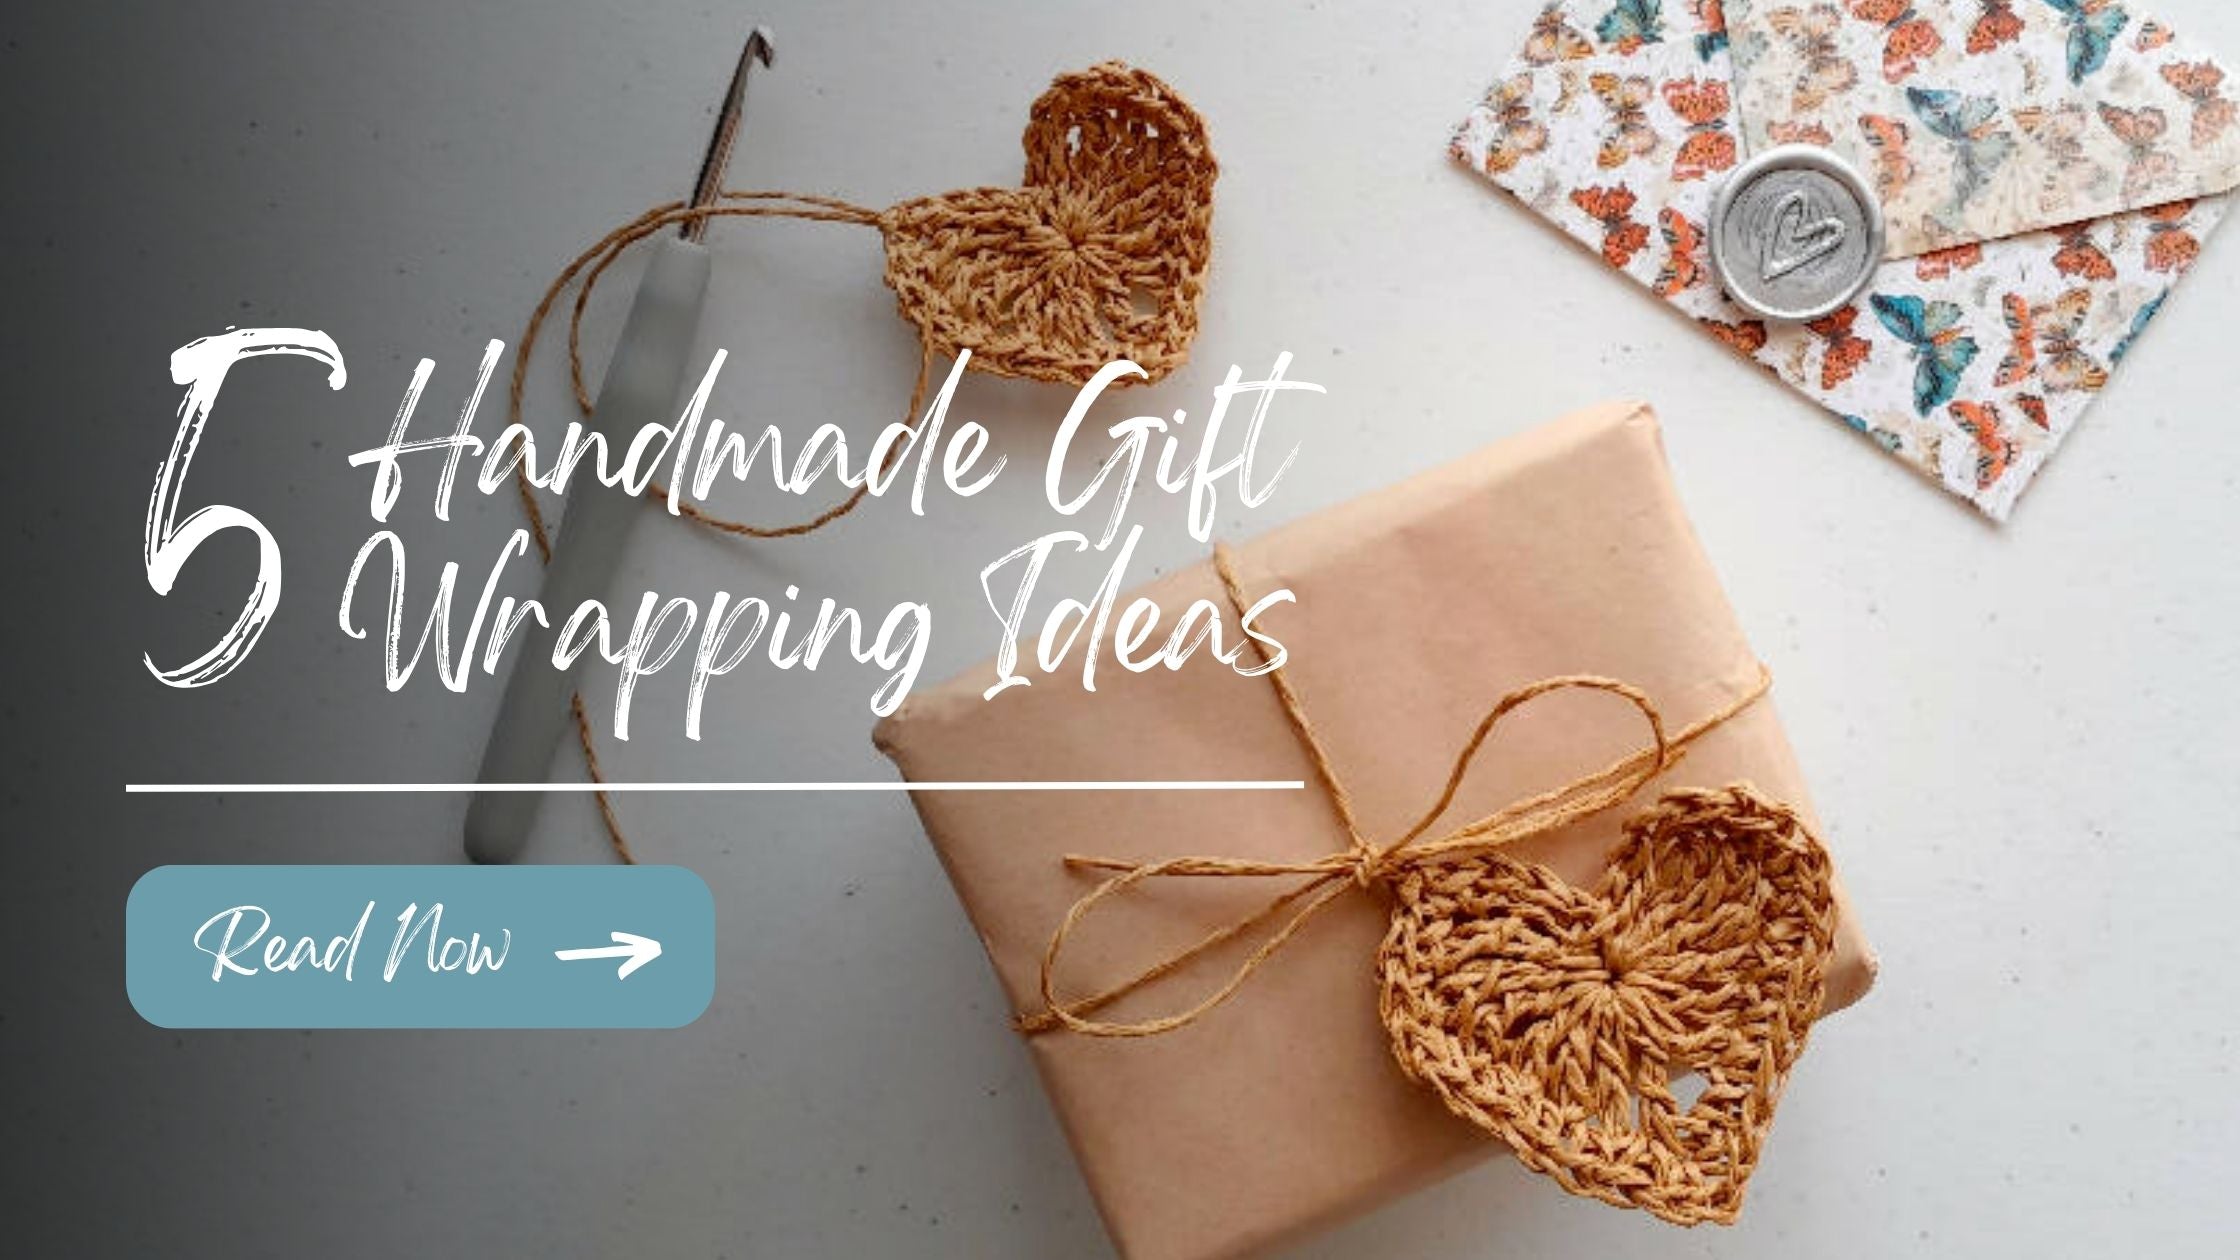 5 Handmade Gift Wrapping Ideas